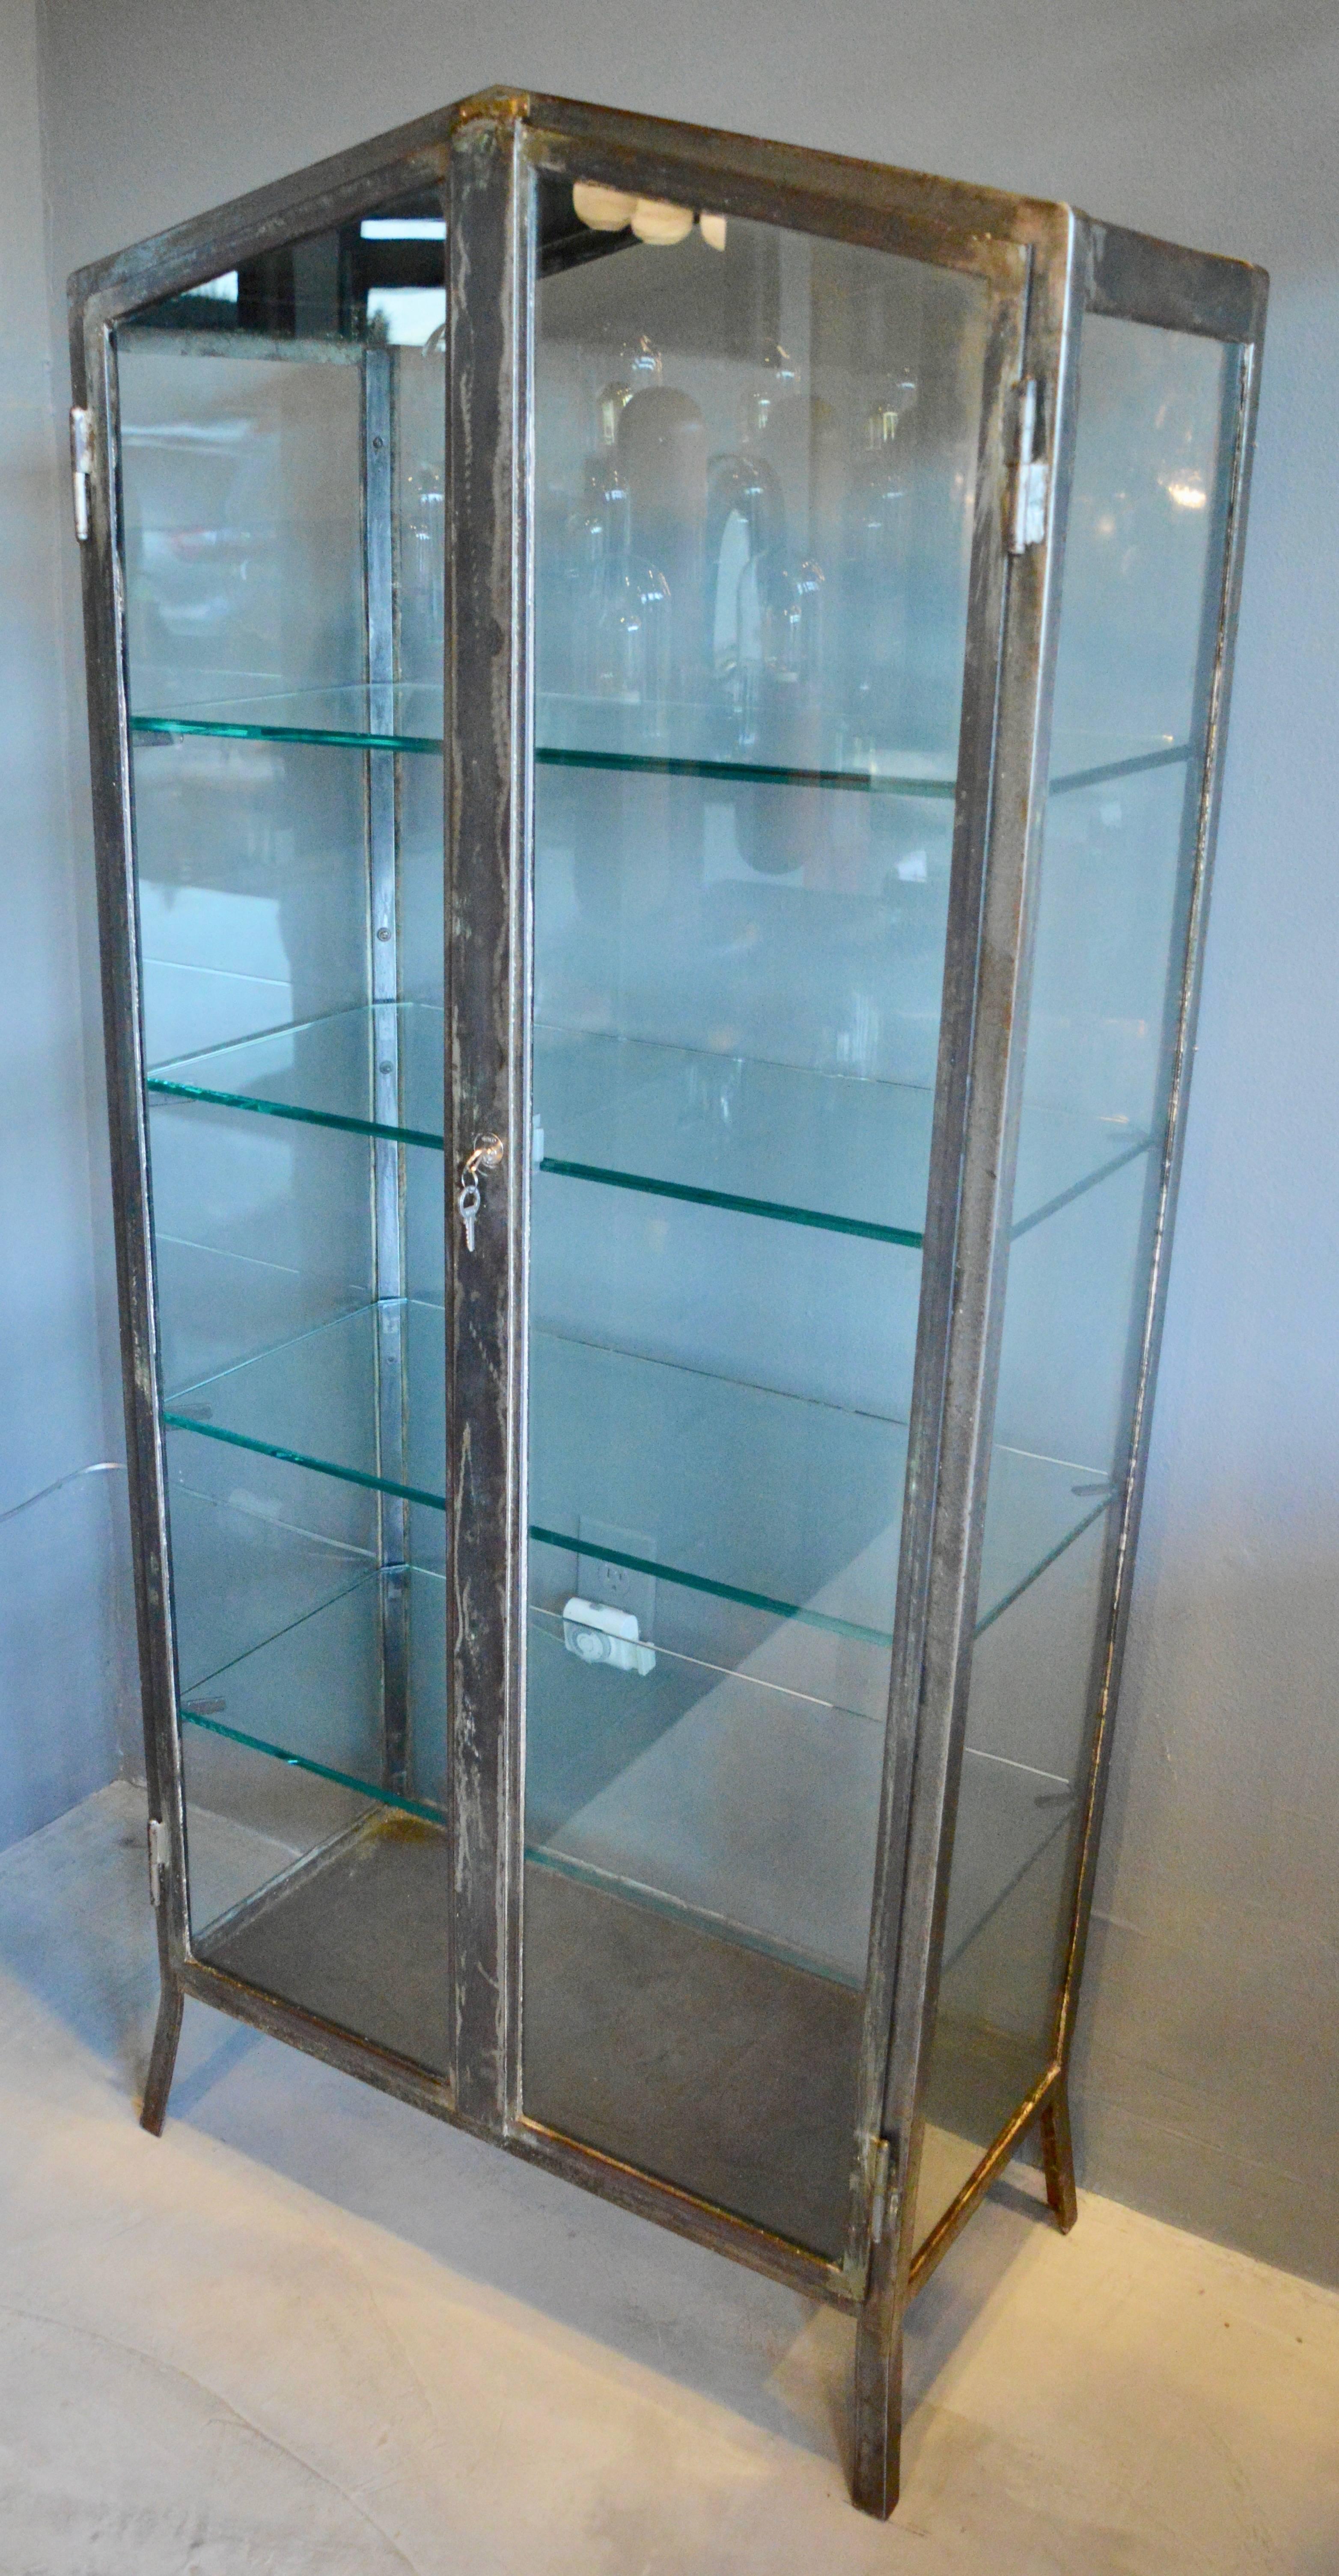 Handsome iron and glass vitrine made in the 1930s in Buenos Aires. All original iron and glass frame. Newly made thick glass shelves with notched corners to fit snugly inside. Fantastic display cabinet. Other vitrines available in separate listings.